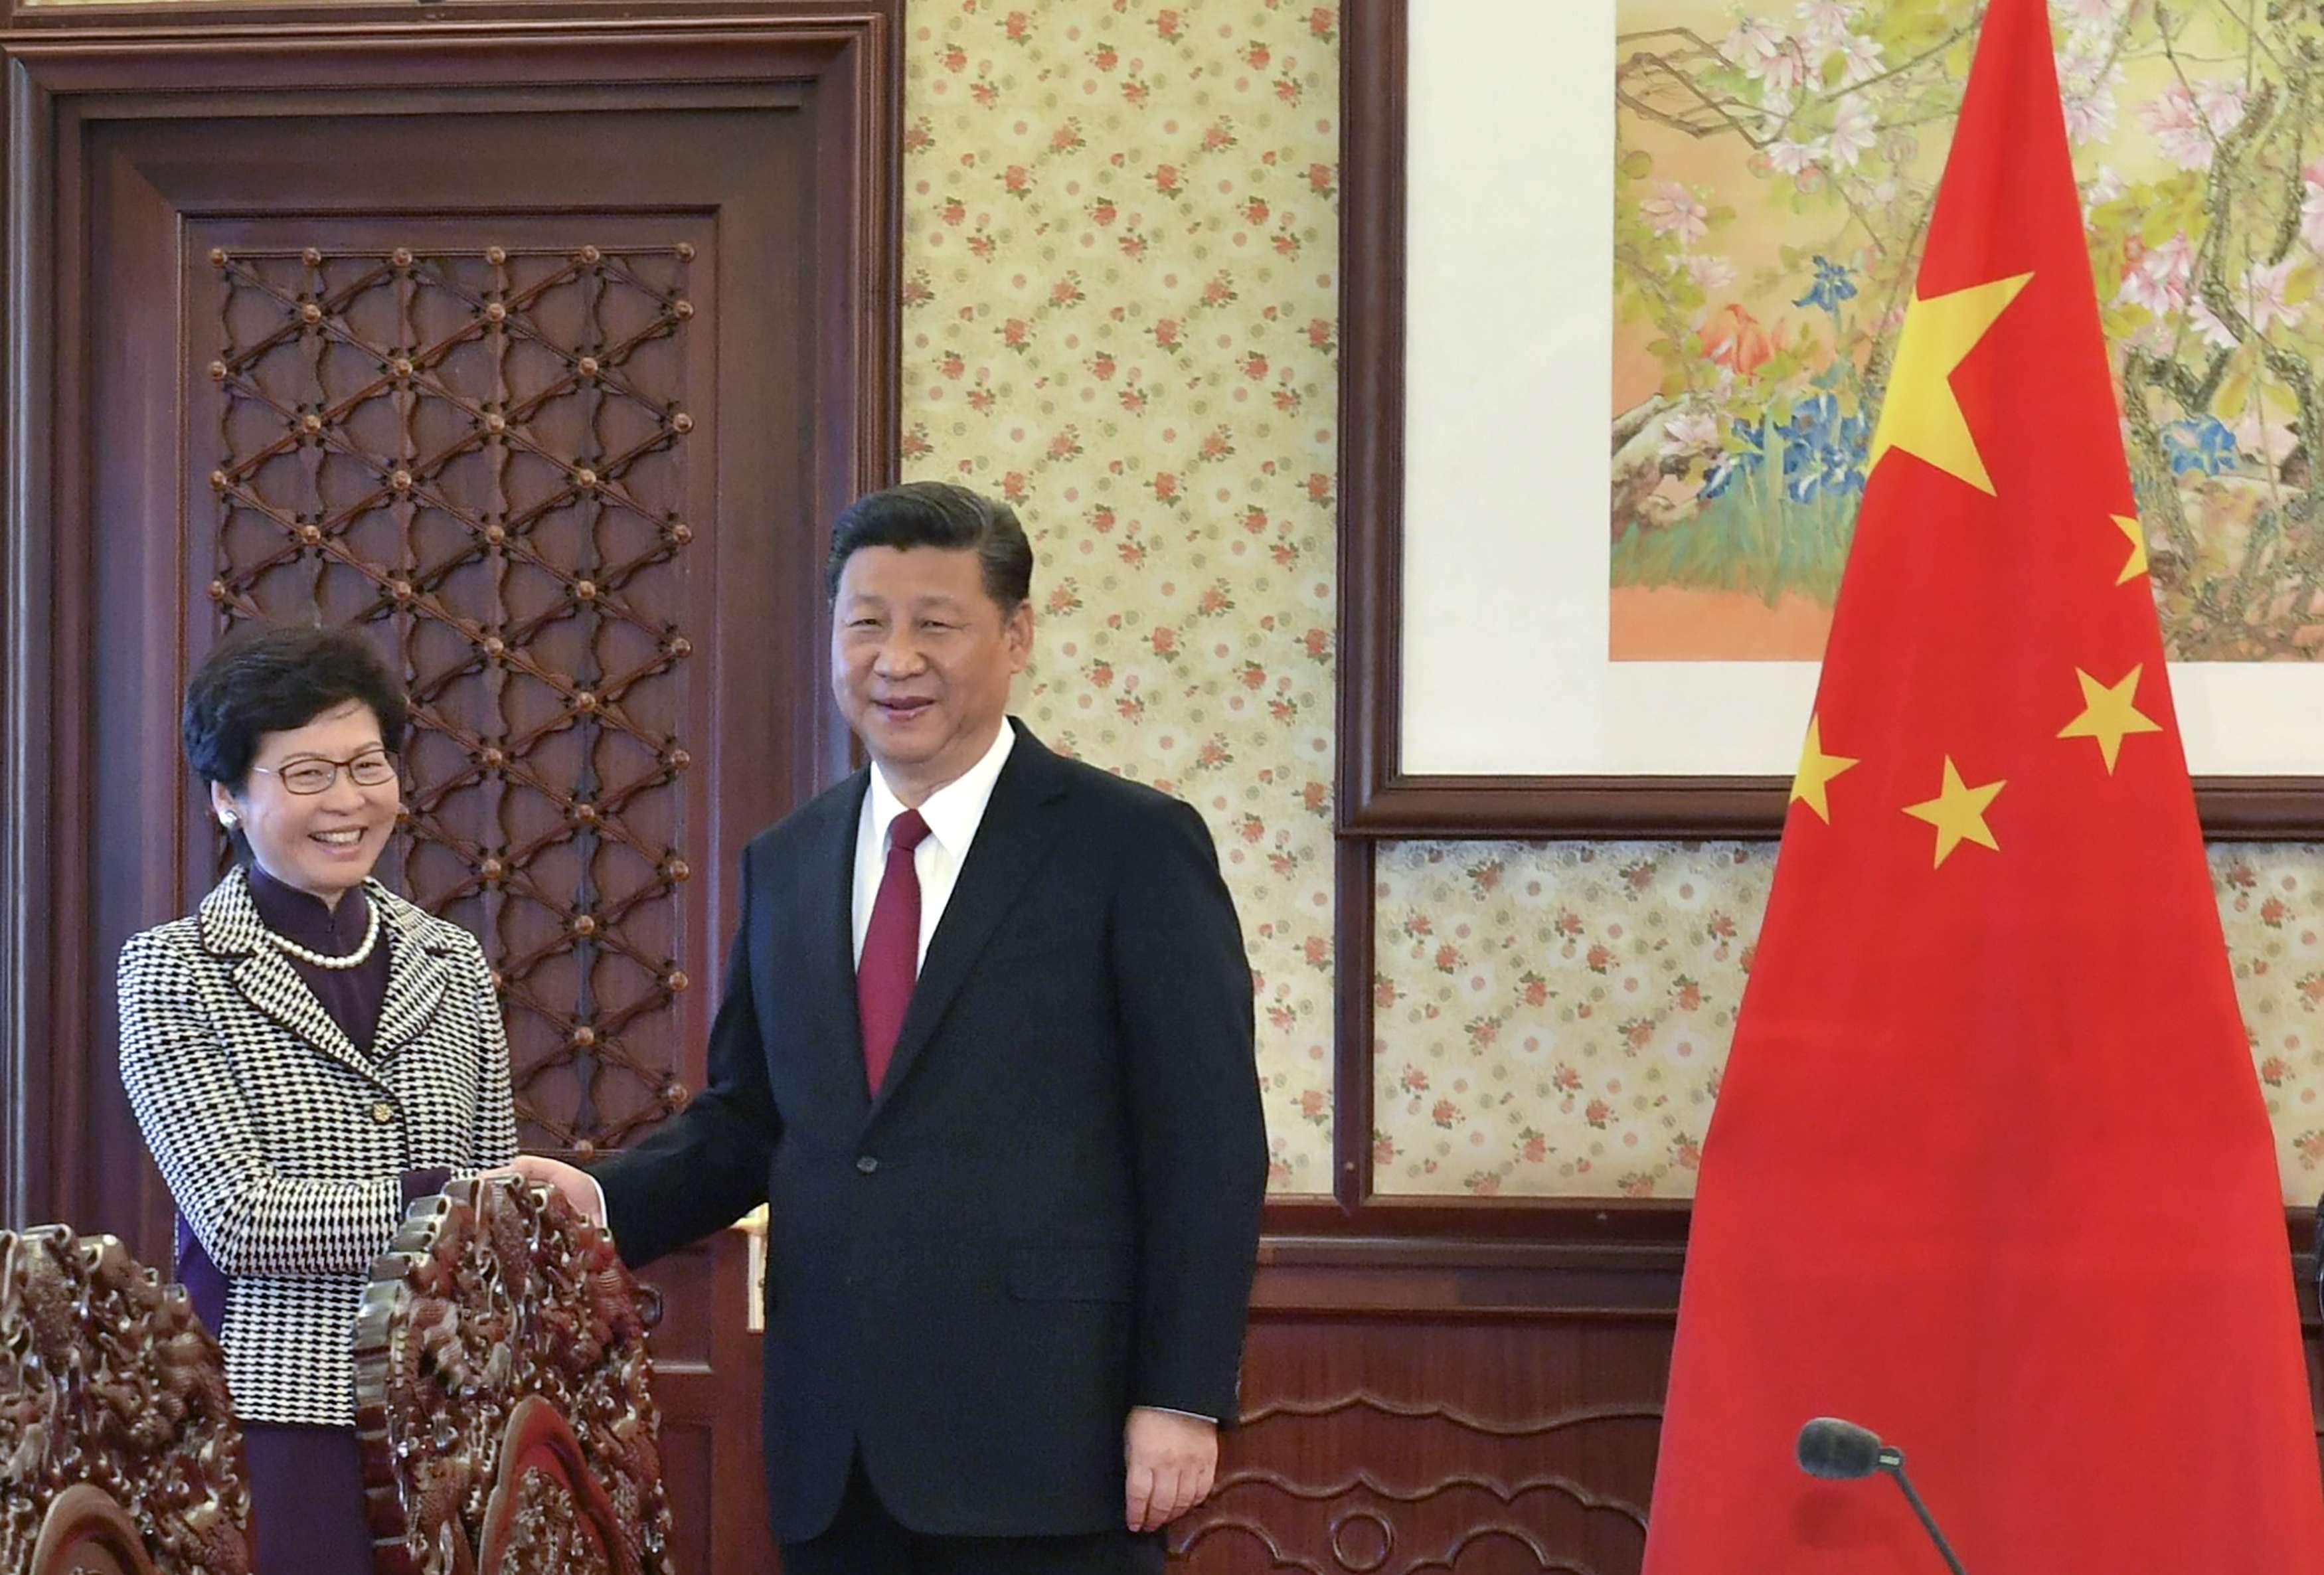 Chief executive-elect Carrie Lam meets President Xi Jinping in Beijing. Photo: ISD